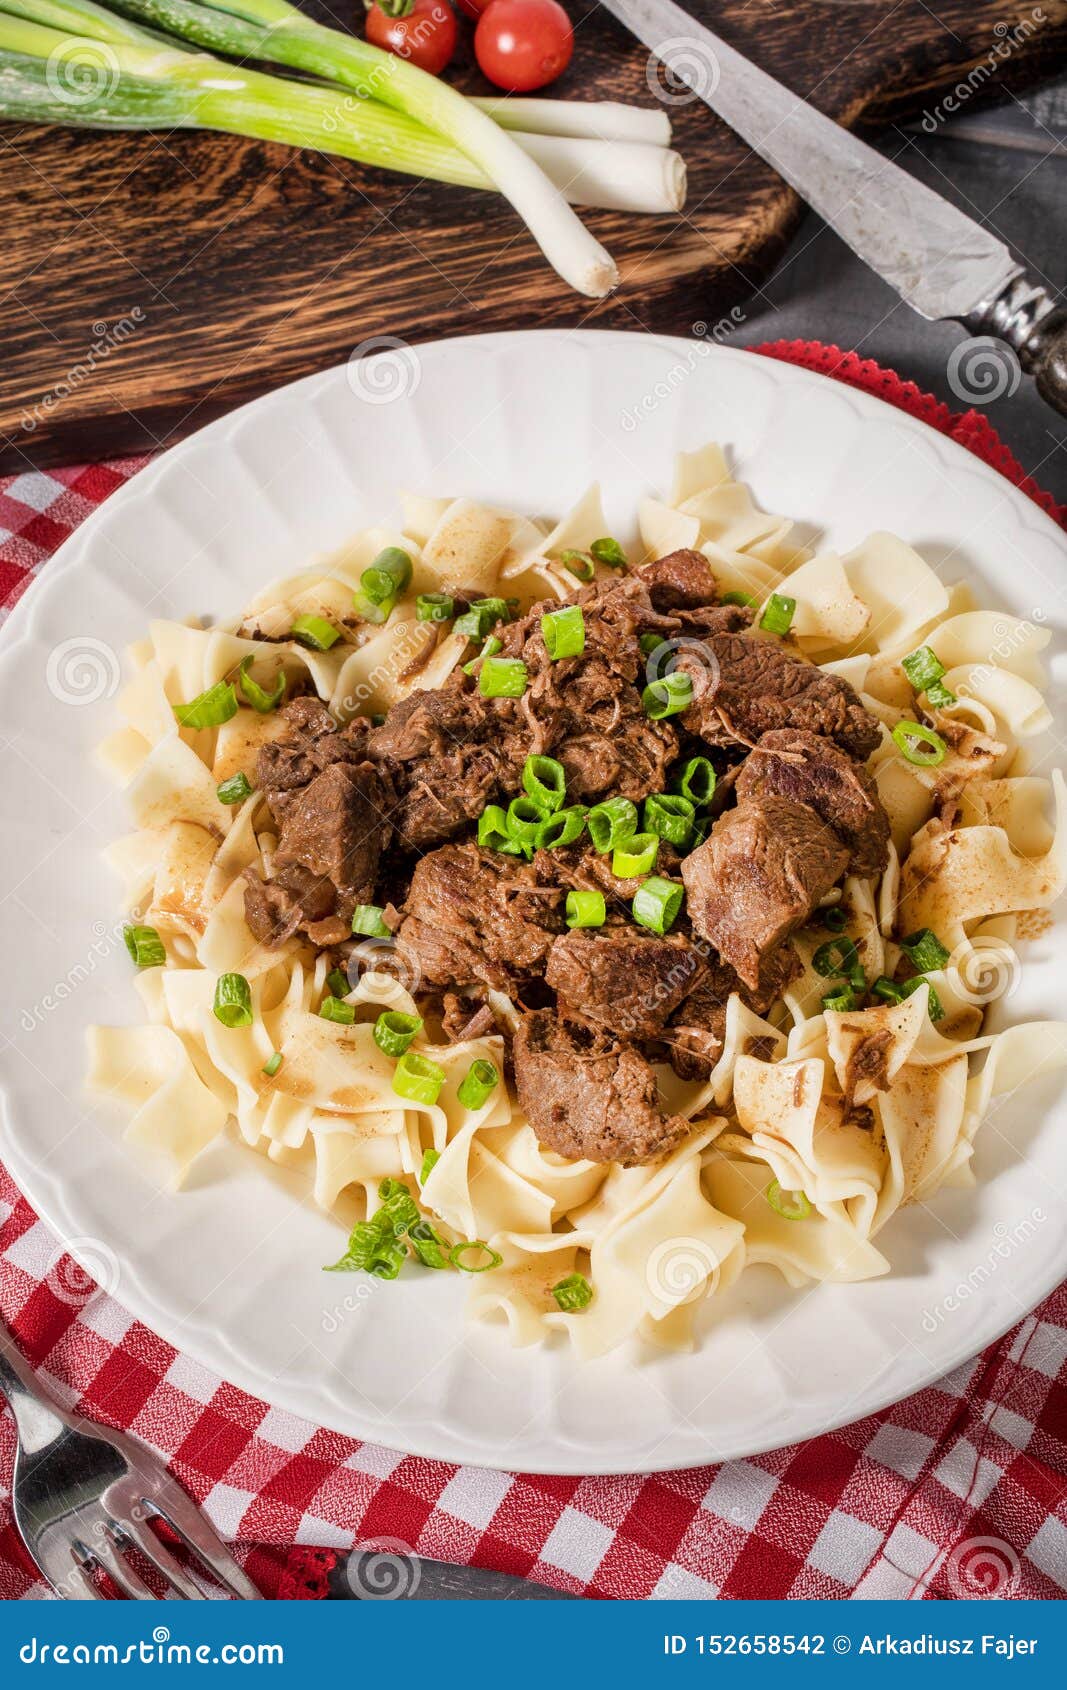 Stewed Beef with Tagliatelle Pasta Stock Photo - Image of meal, pasta ...